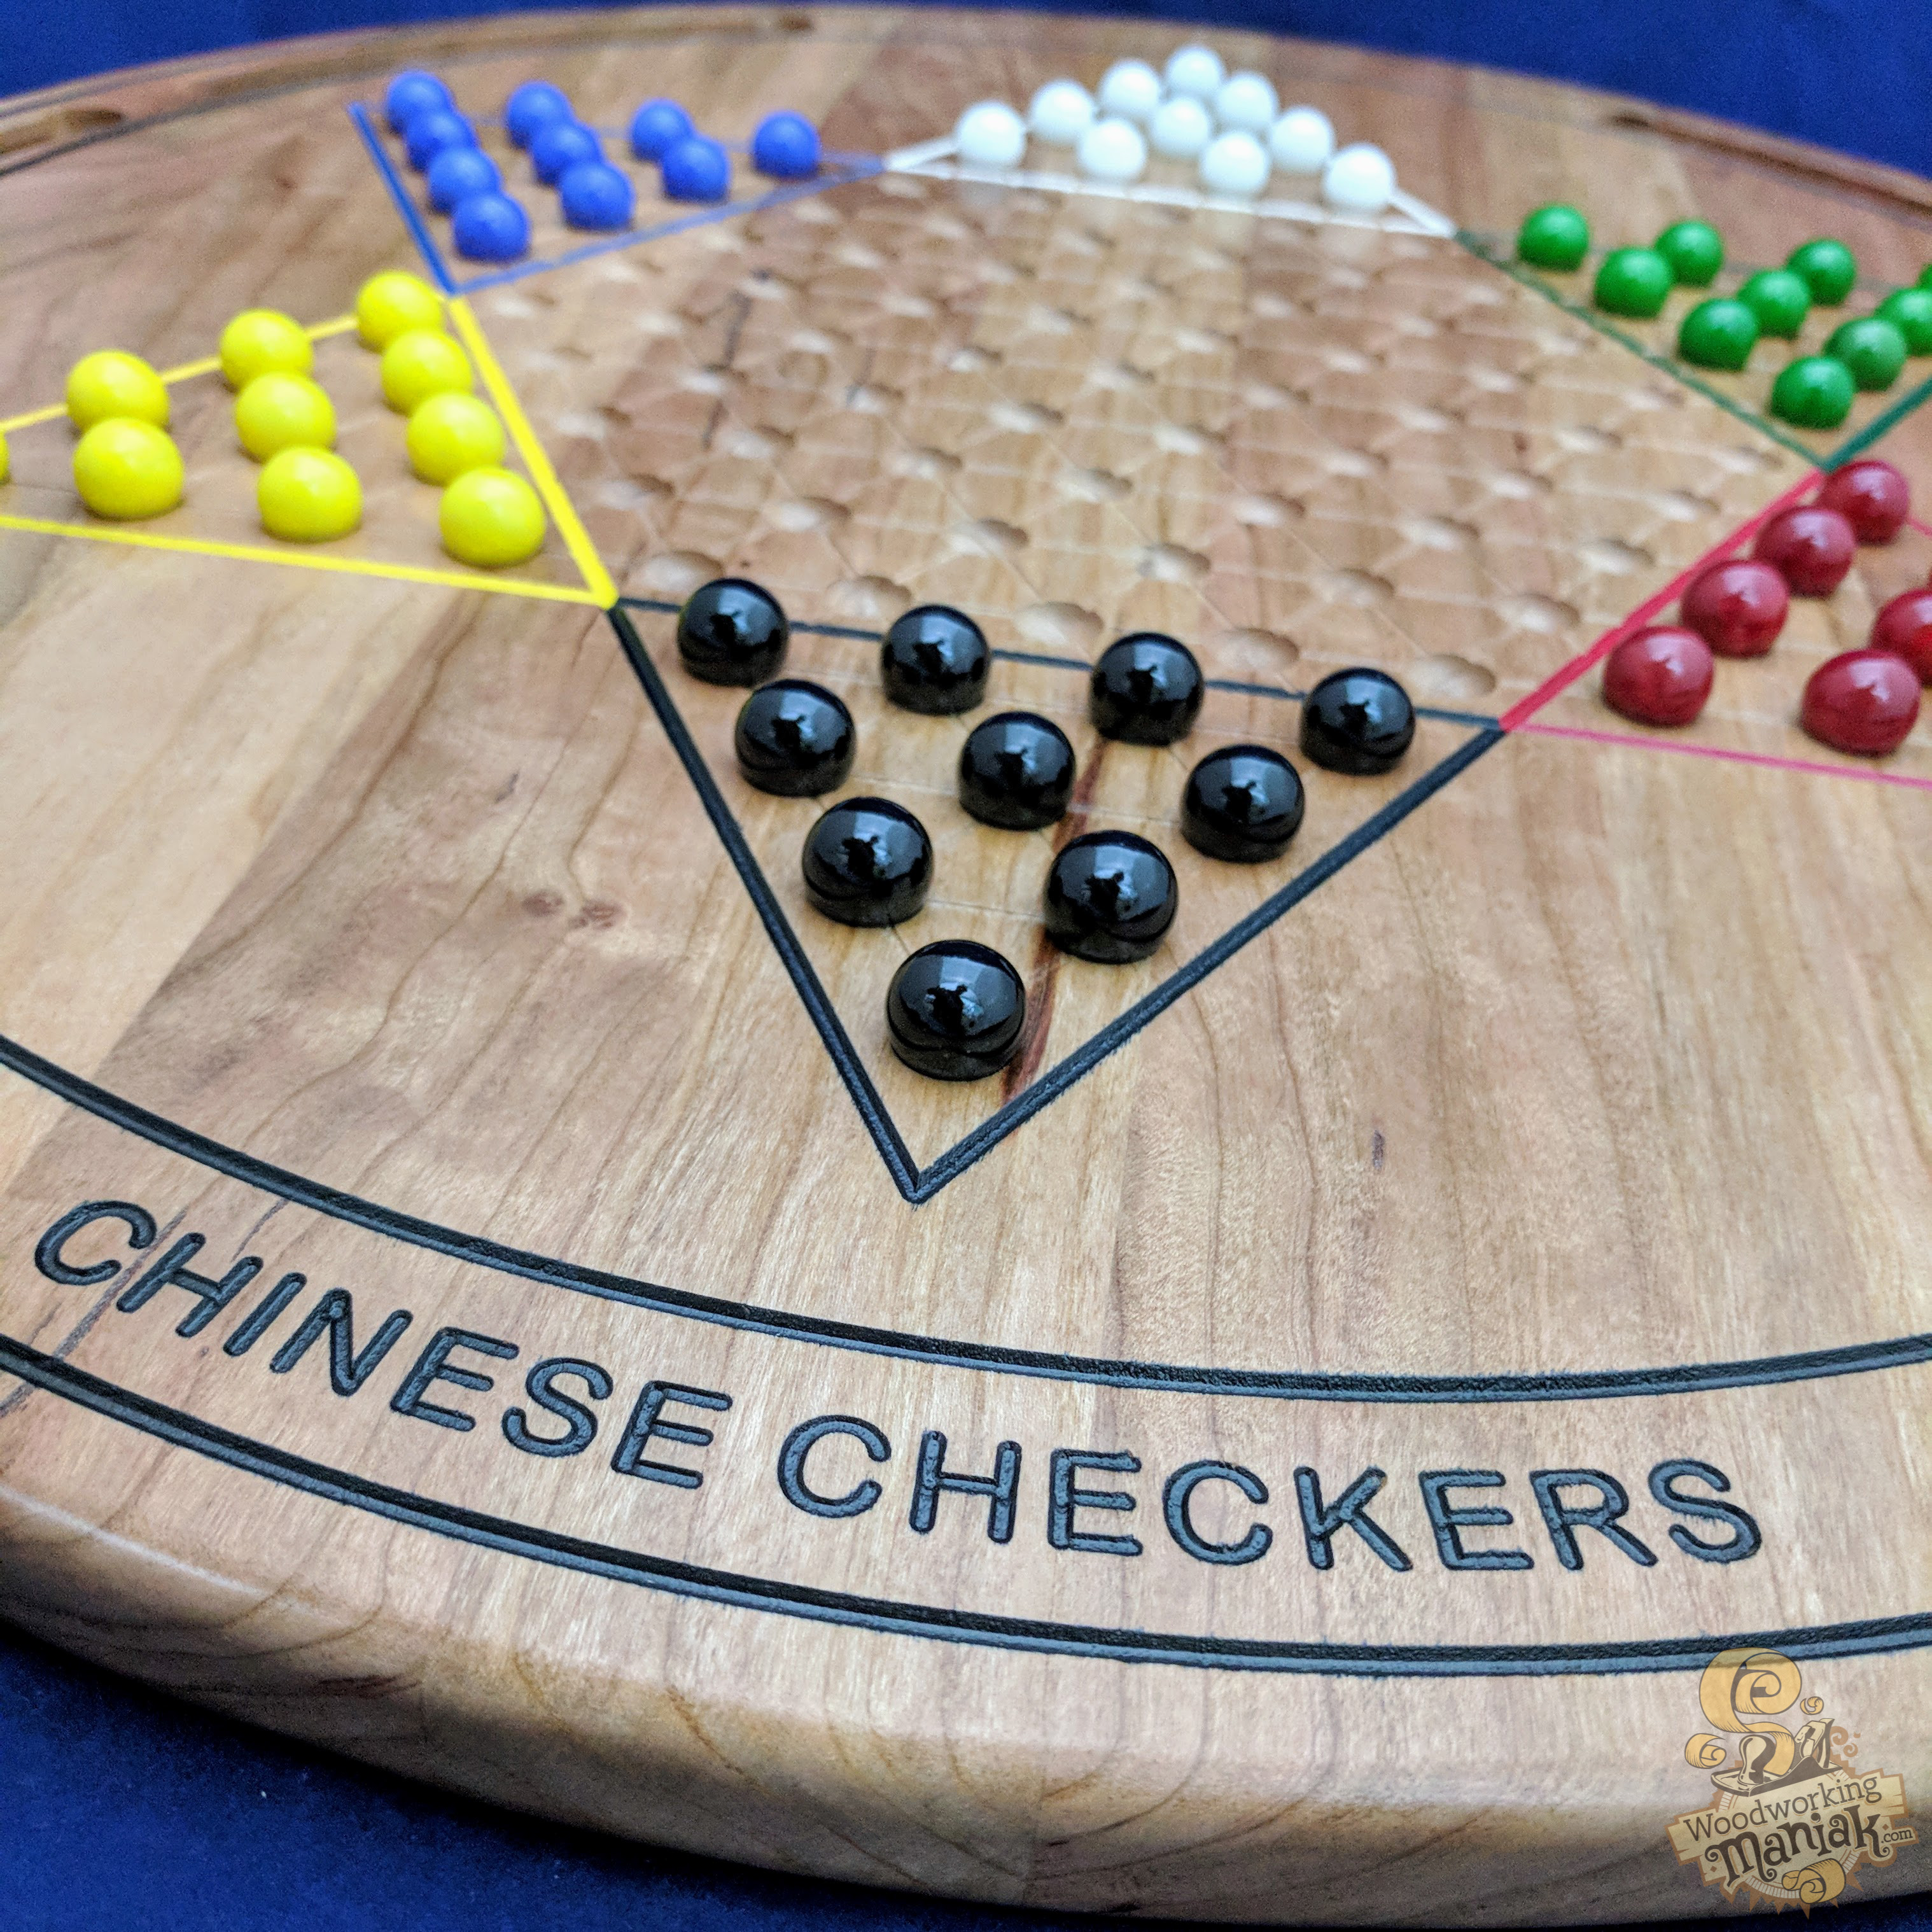 20in Hanging Chinese Checker Board - Woodworking Maniak